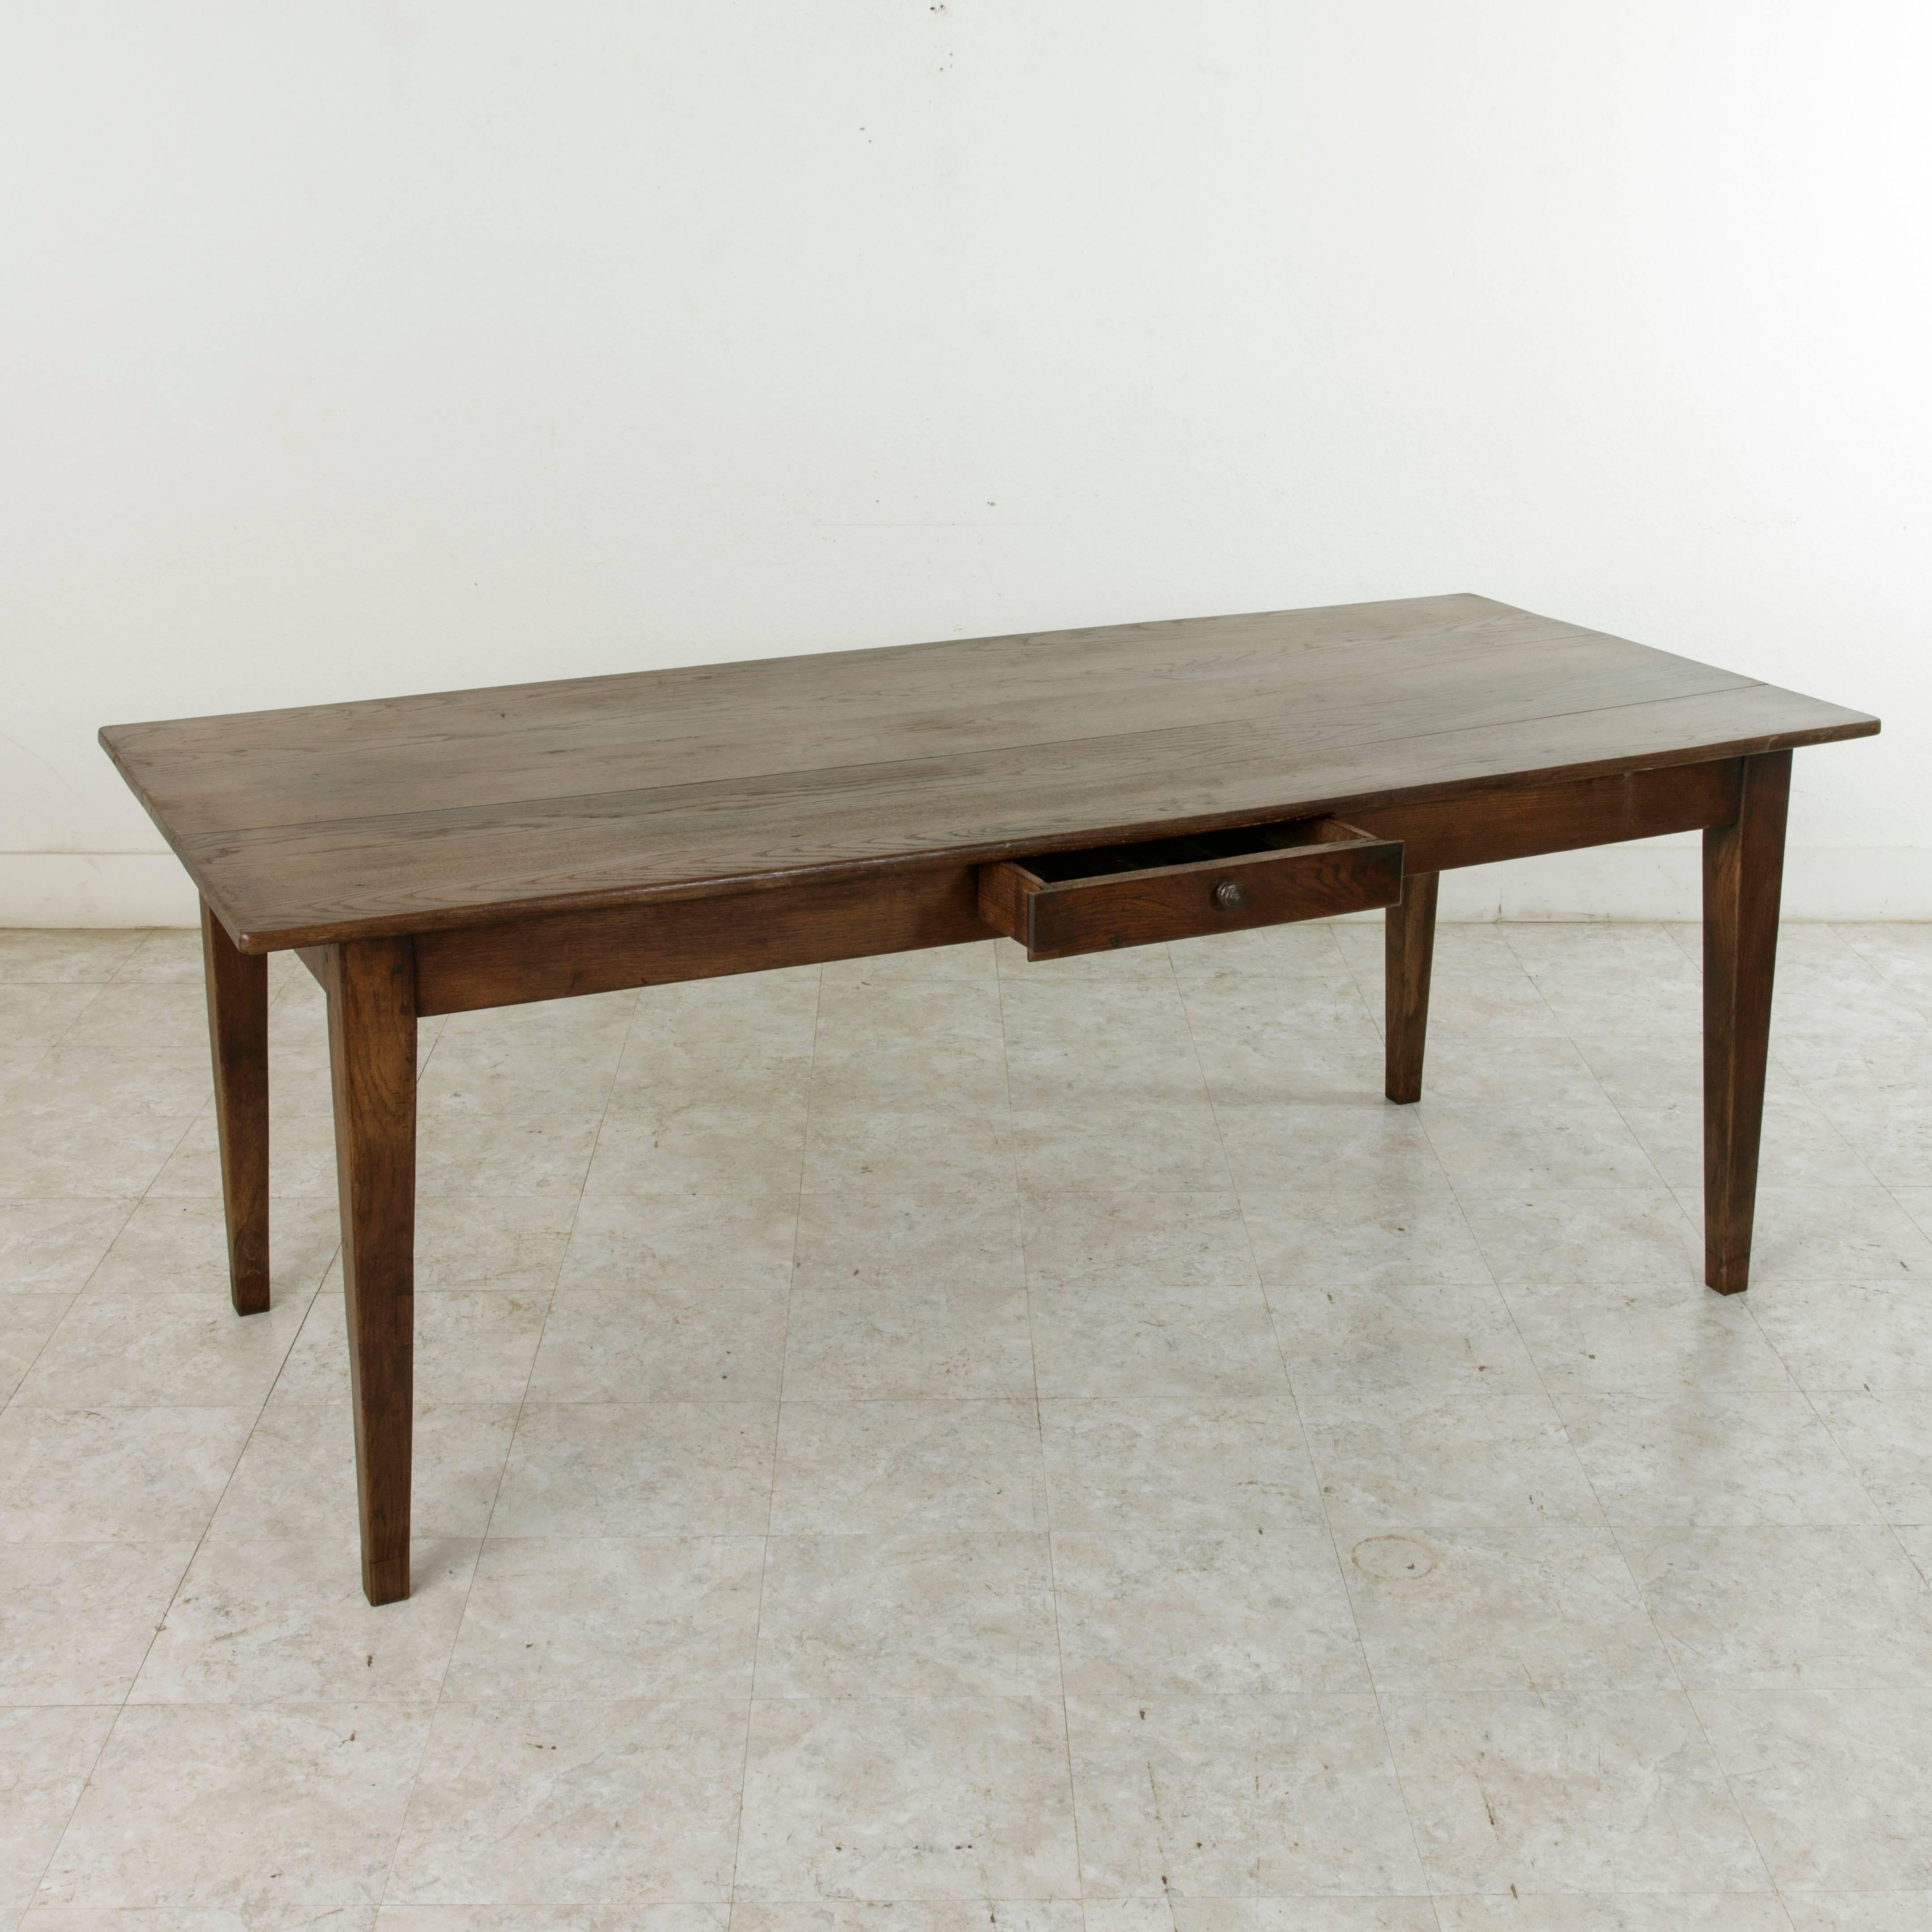 Early 20th Century French Oak Farm Table, Dining Table with Drawer from Normandy 3